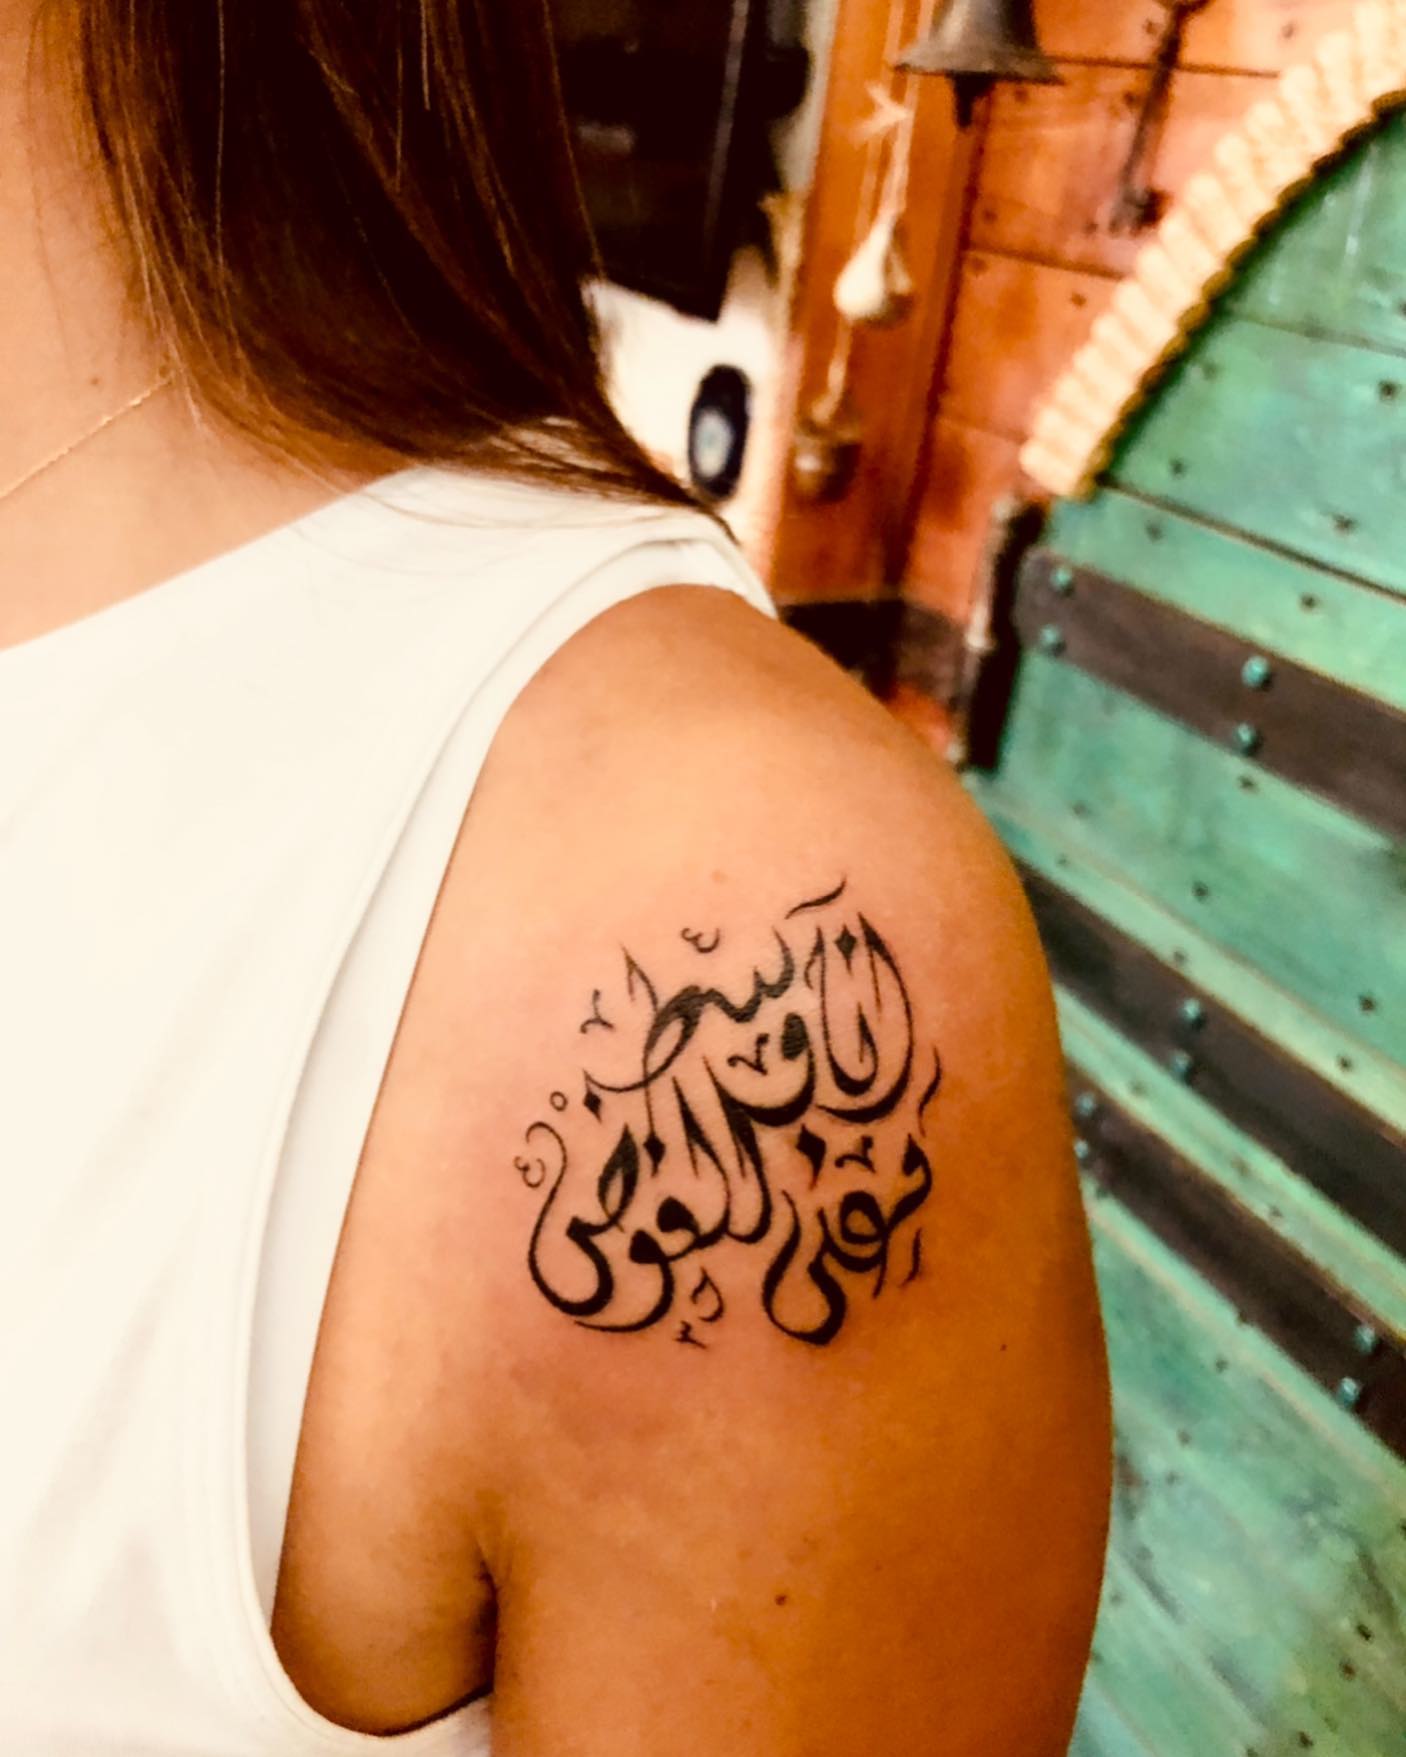 Here is an another Arabic calligraphy tattoo to give it a try. You can also get its smaller one if you like smaller tattoos.